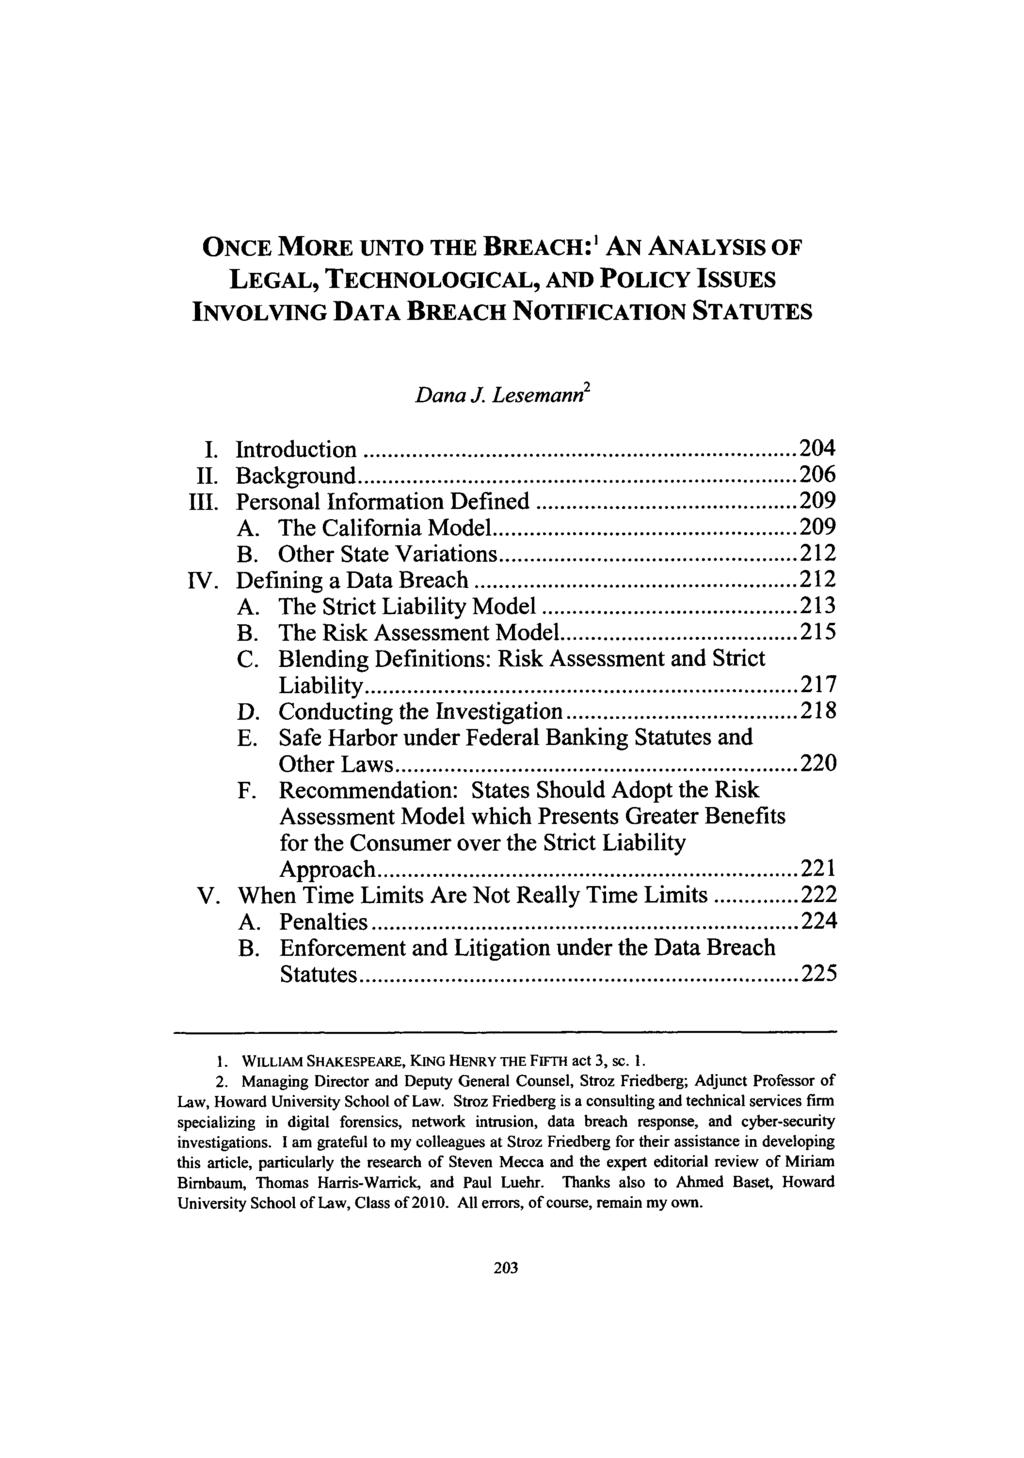 Lesemann: One More Unto the Breach ONCE MORE UNTO THE BREACH:' AN ANALYSIS OF LEGAL, TECHNOLOGICAL, AND POLICY ISSUES INVOLVING DATA BREACH NOTIFICATION STATUTES Dana J. Lesemann 2 I. Introduction.